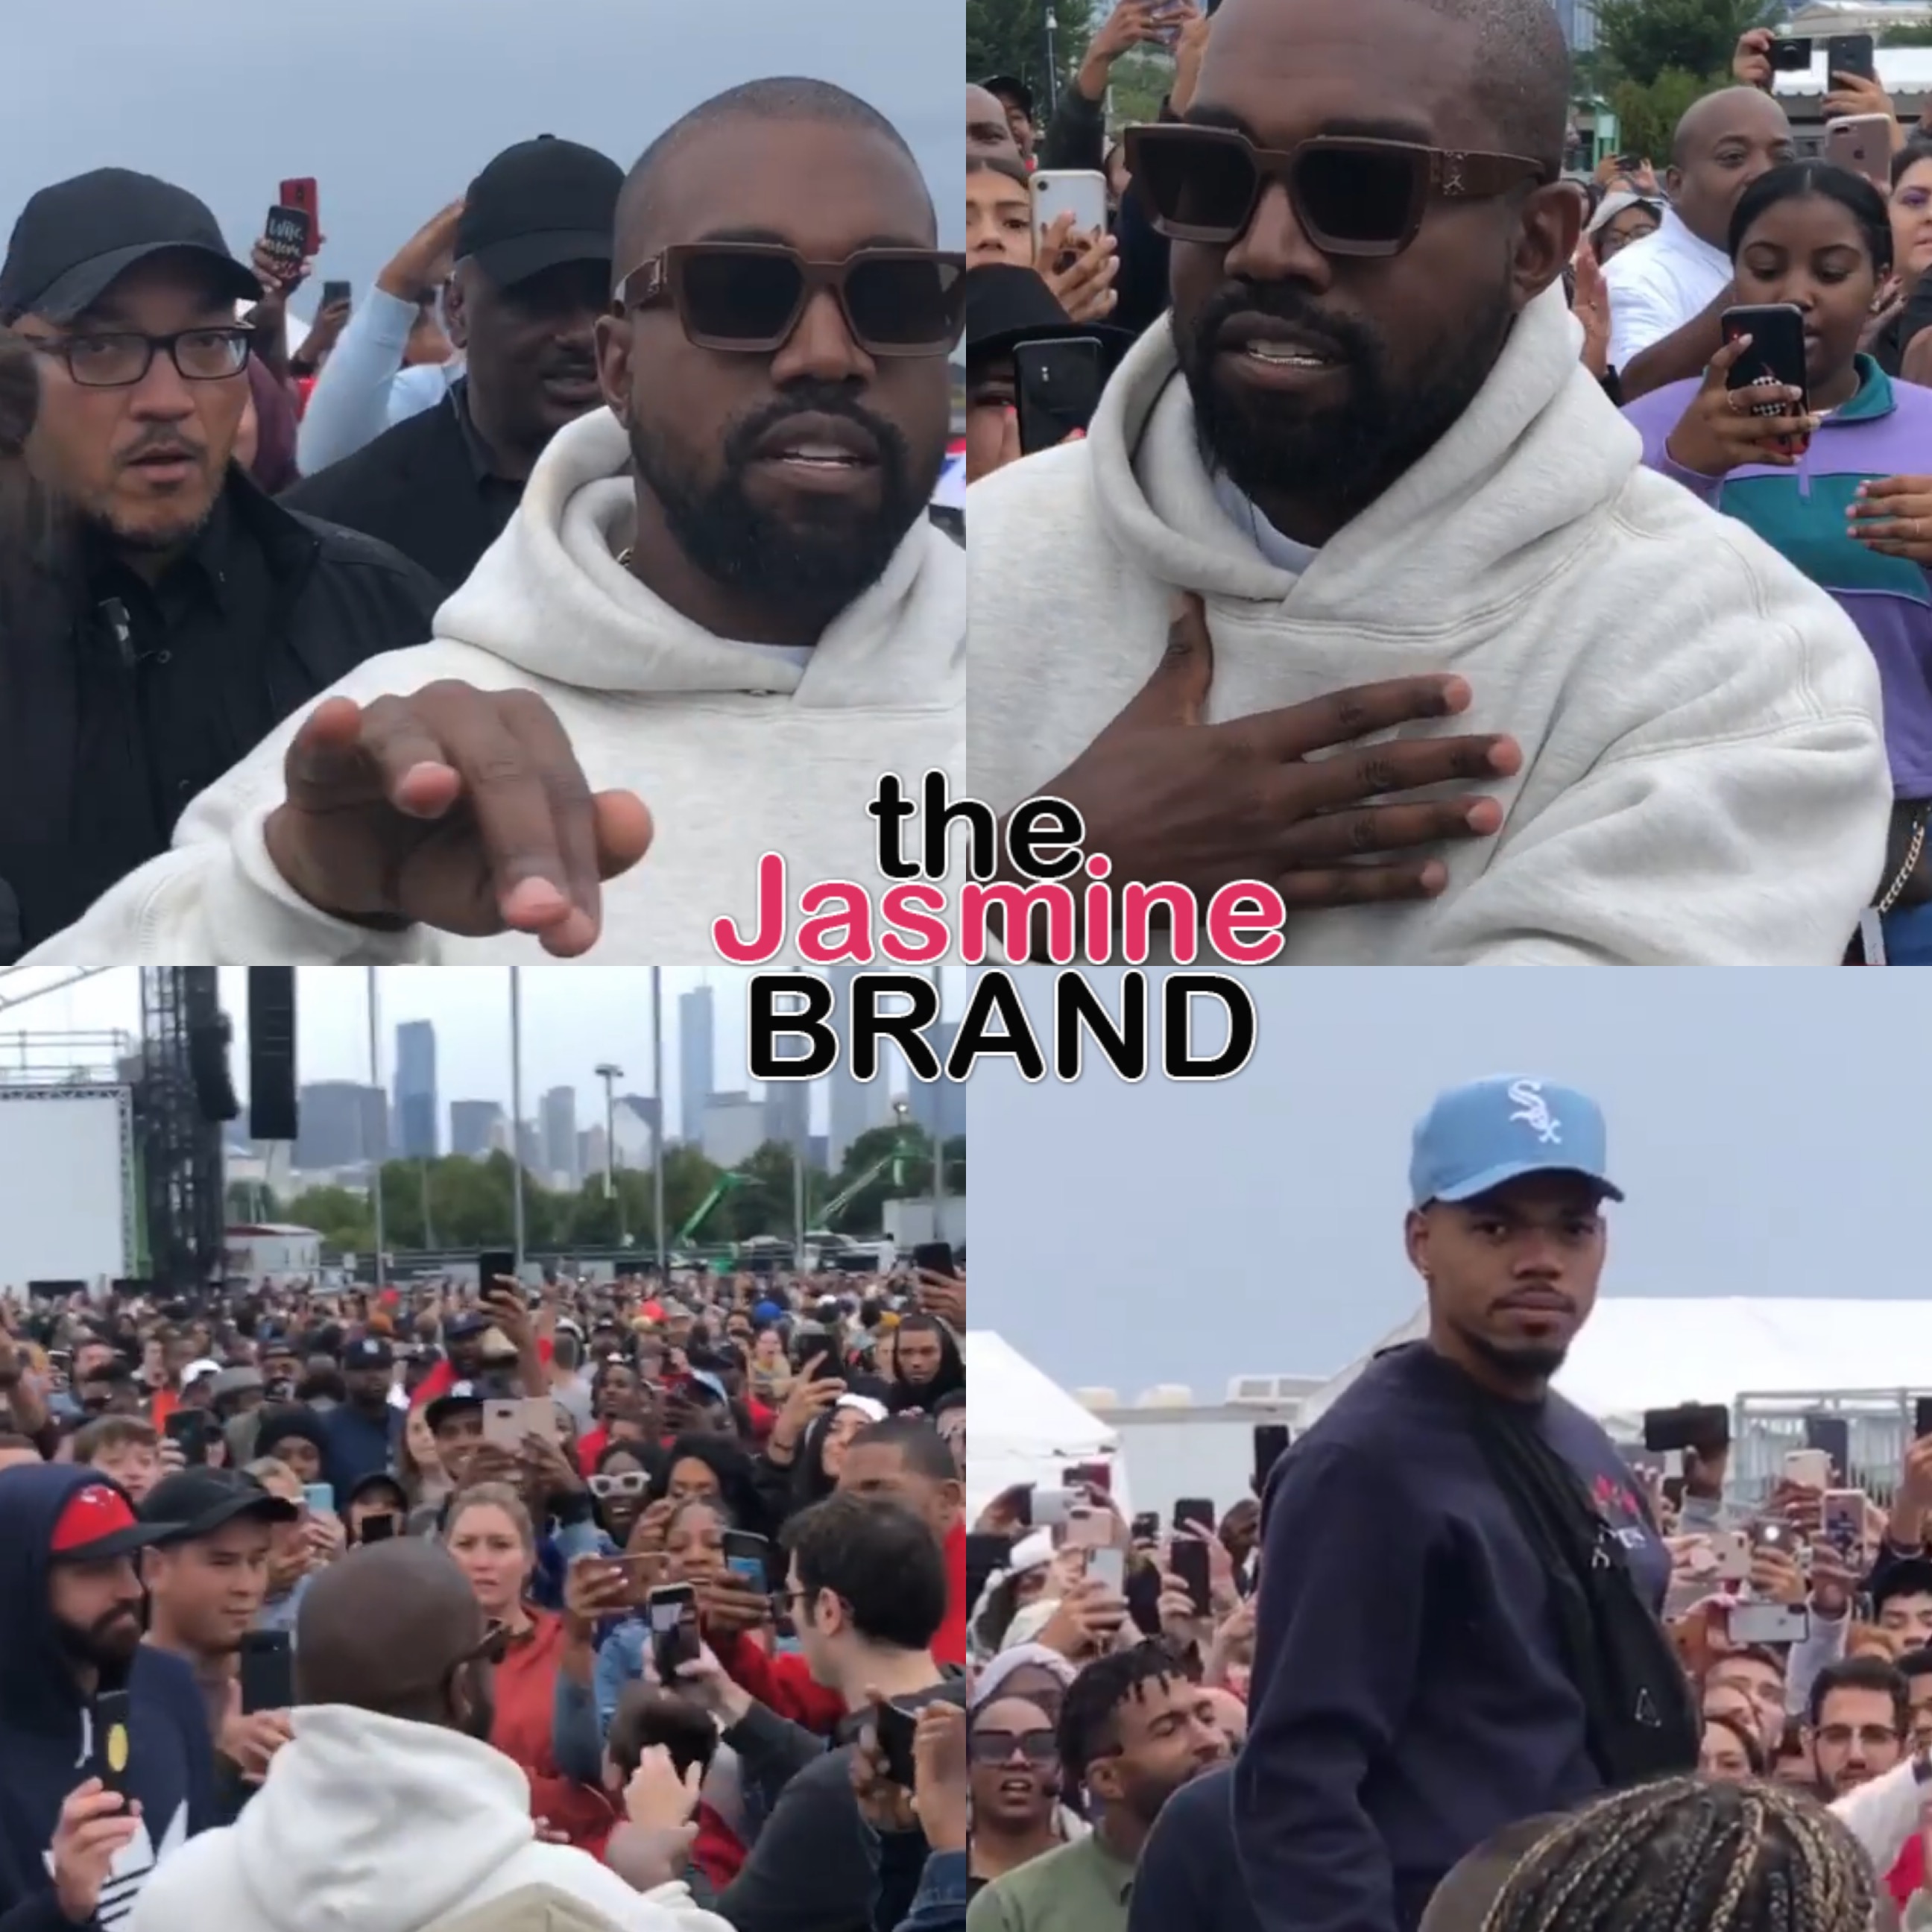 Watch this, this my City” - Kanye West at Sunday Service in Chicago  #modernnotoriety, By Modern Notoriety